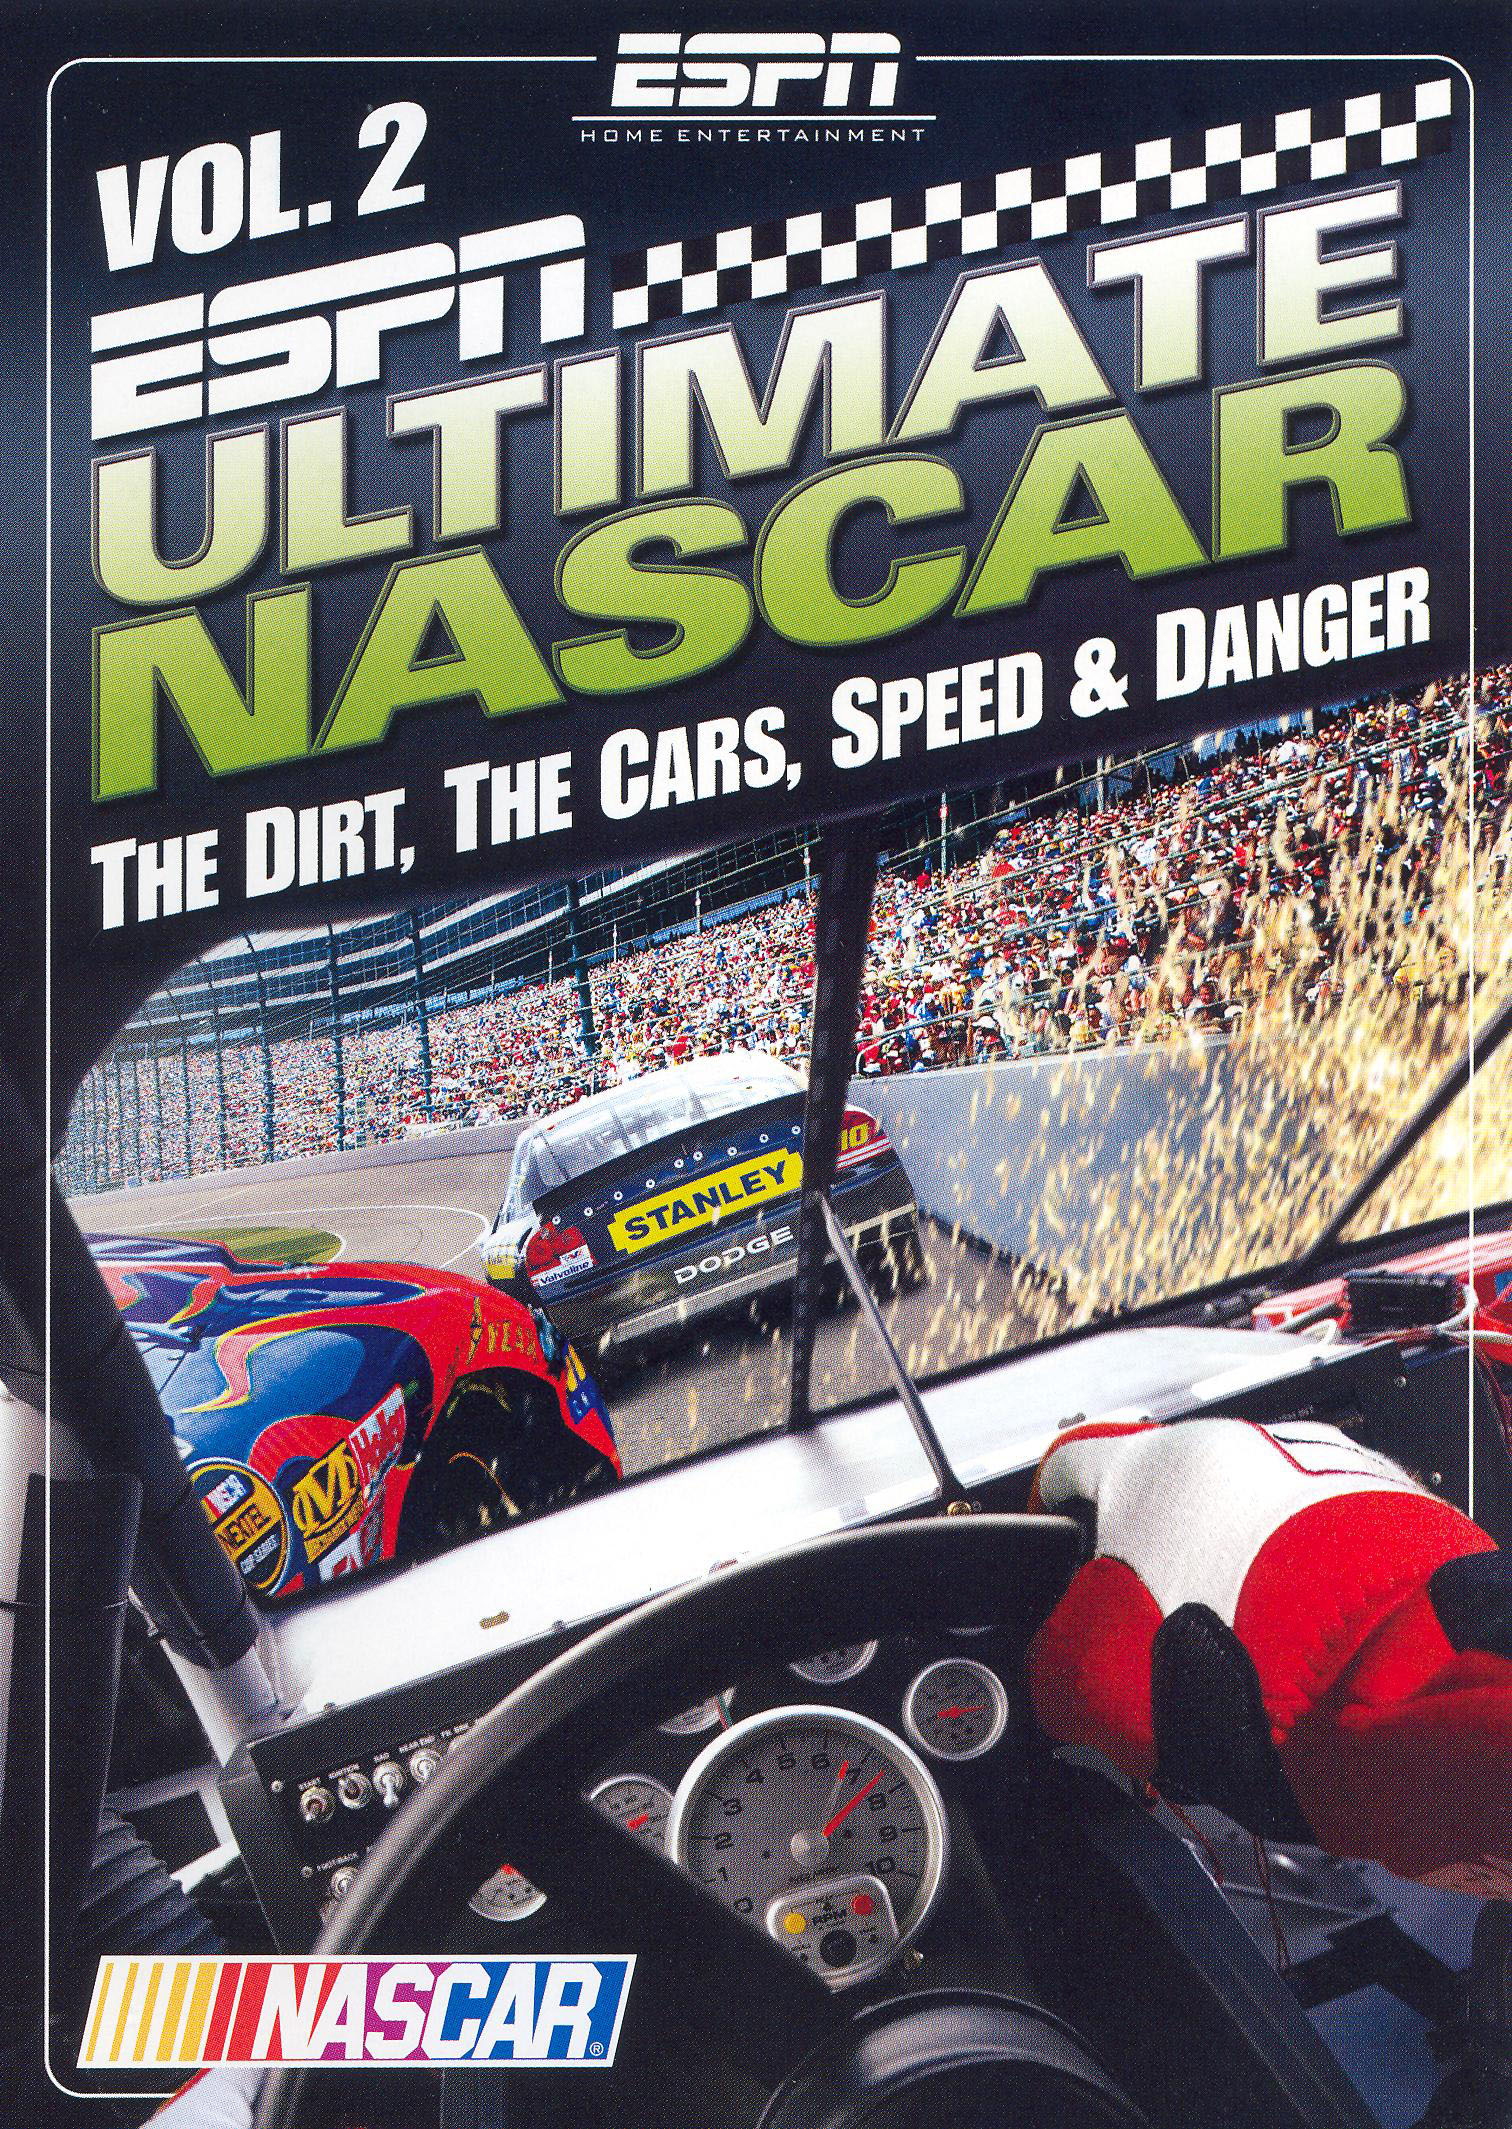 ESPN: Ultimate NASCAR, Vol. 2 The Dirt, The Cars, Speed and Danger [DVD]  [2007] - Best Buy